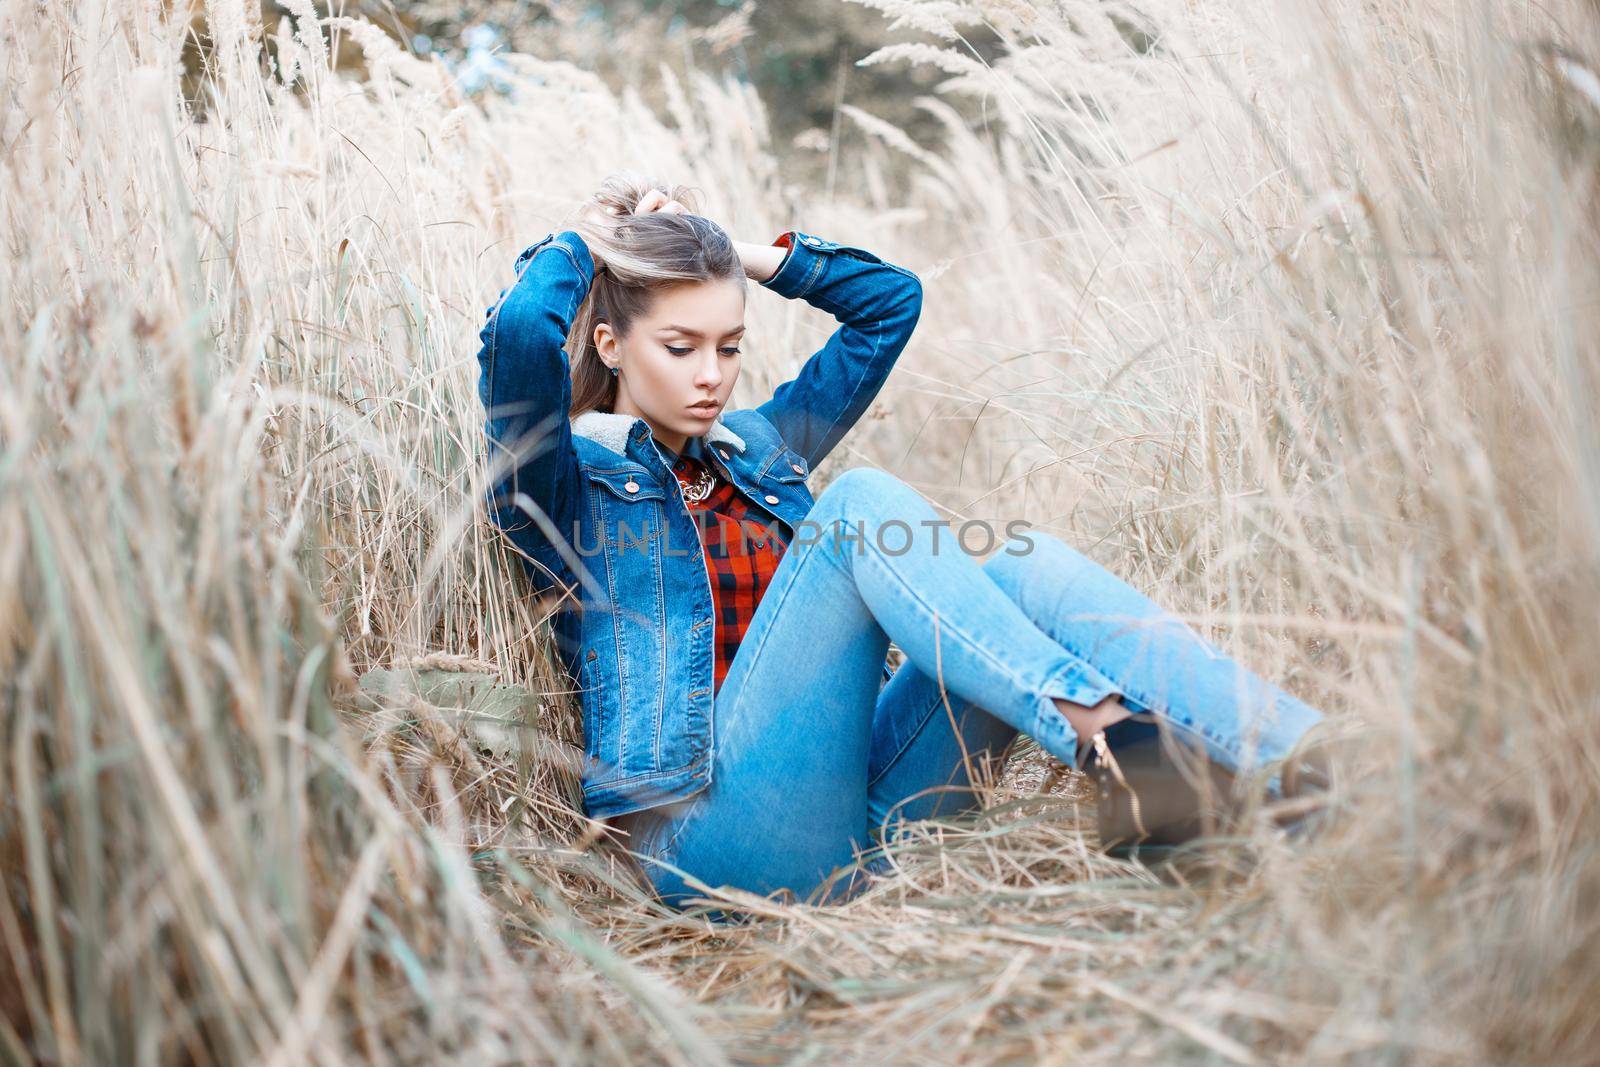 Pretty woman in a denim jacket and jeans sitting in autumn grass.